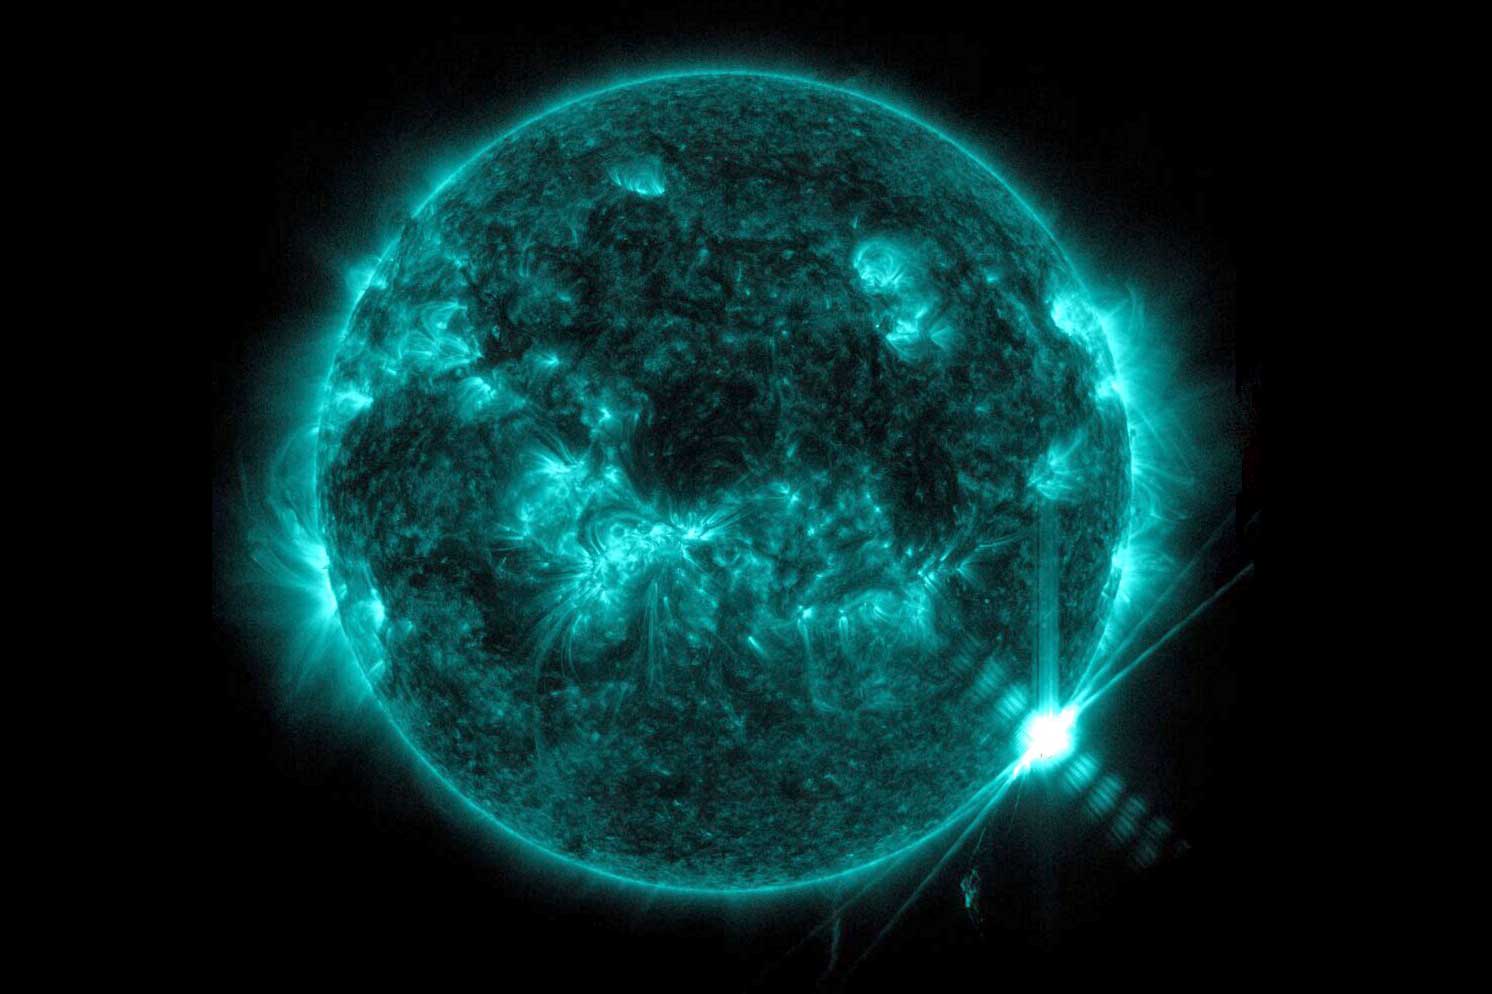 image of a solar flare